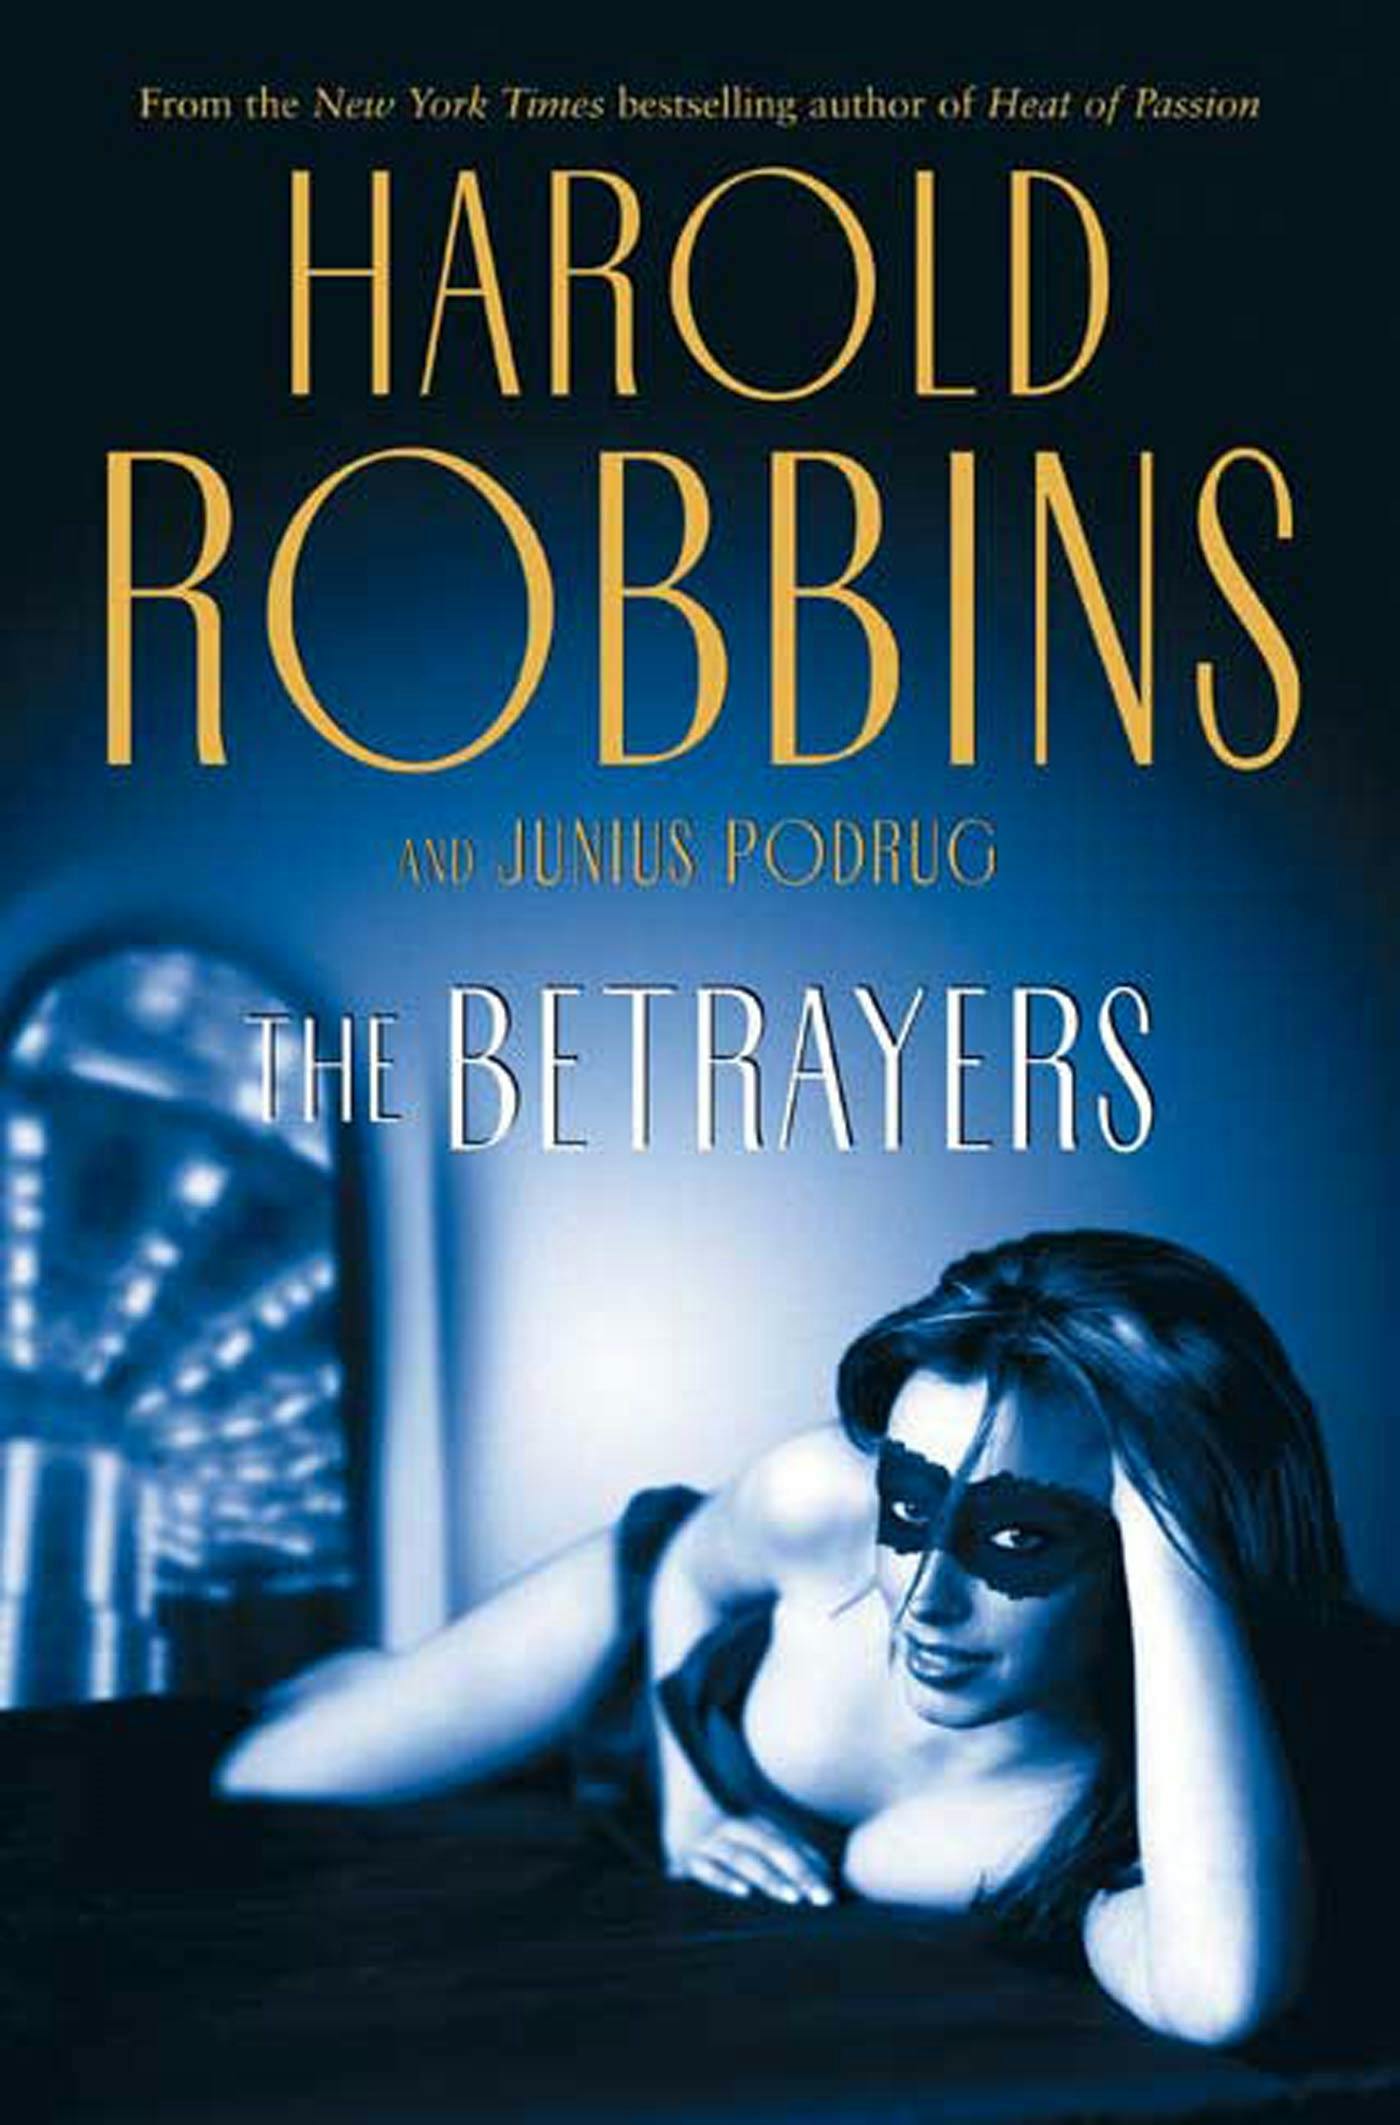 Cover for the book titled as: The Betrayers